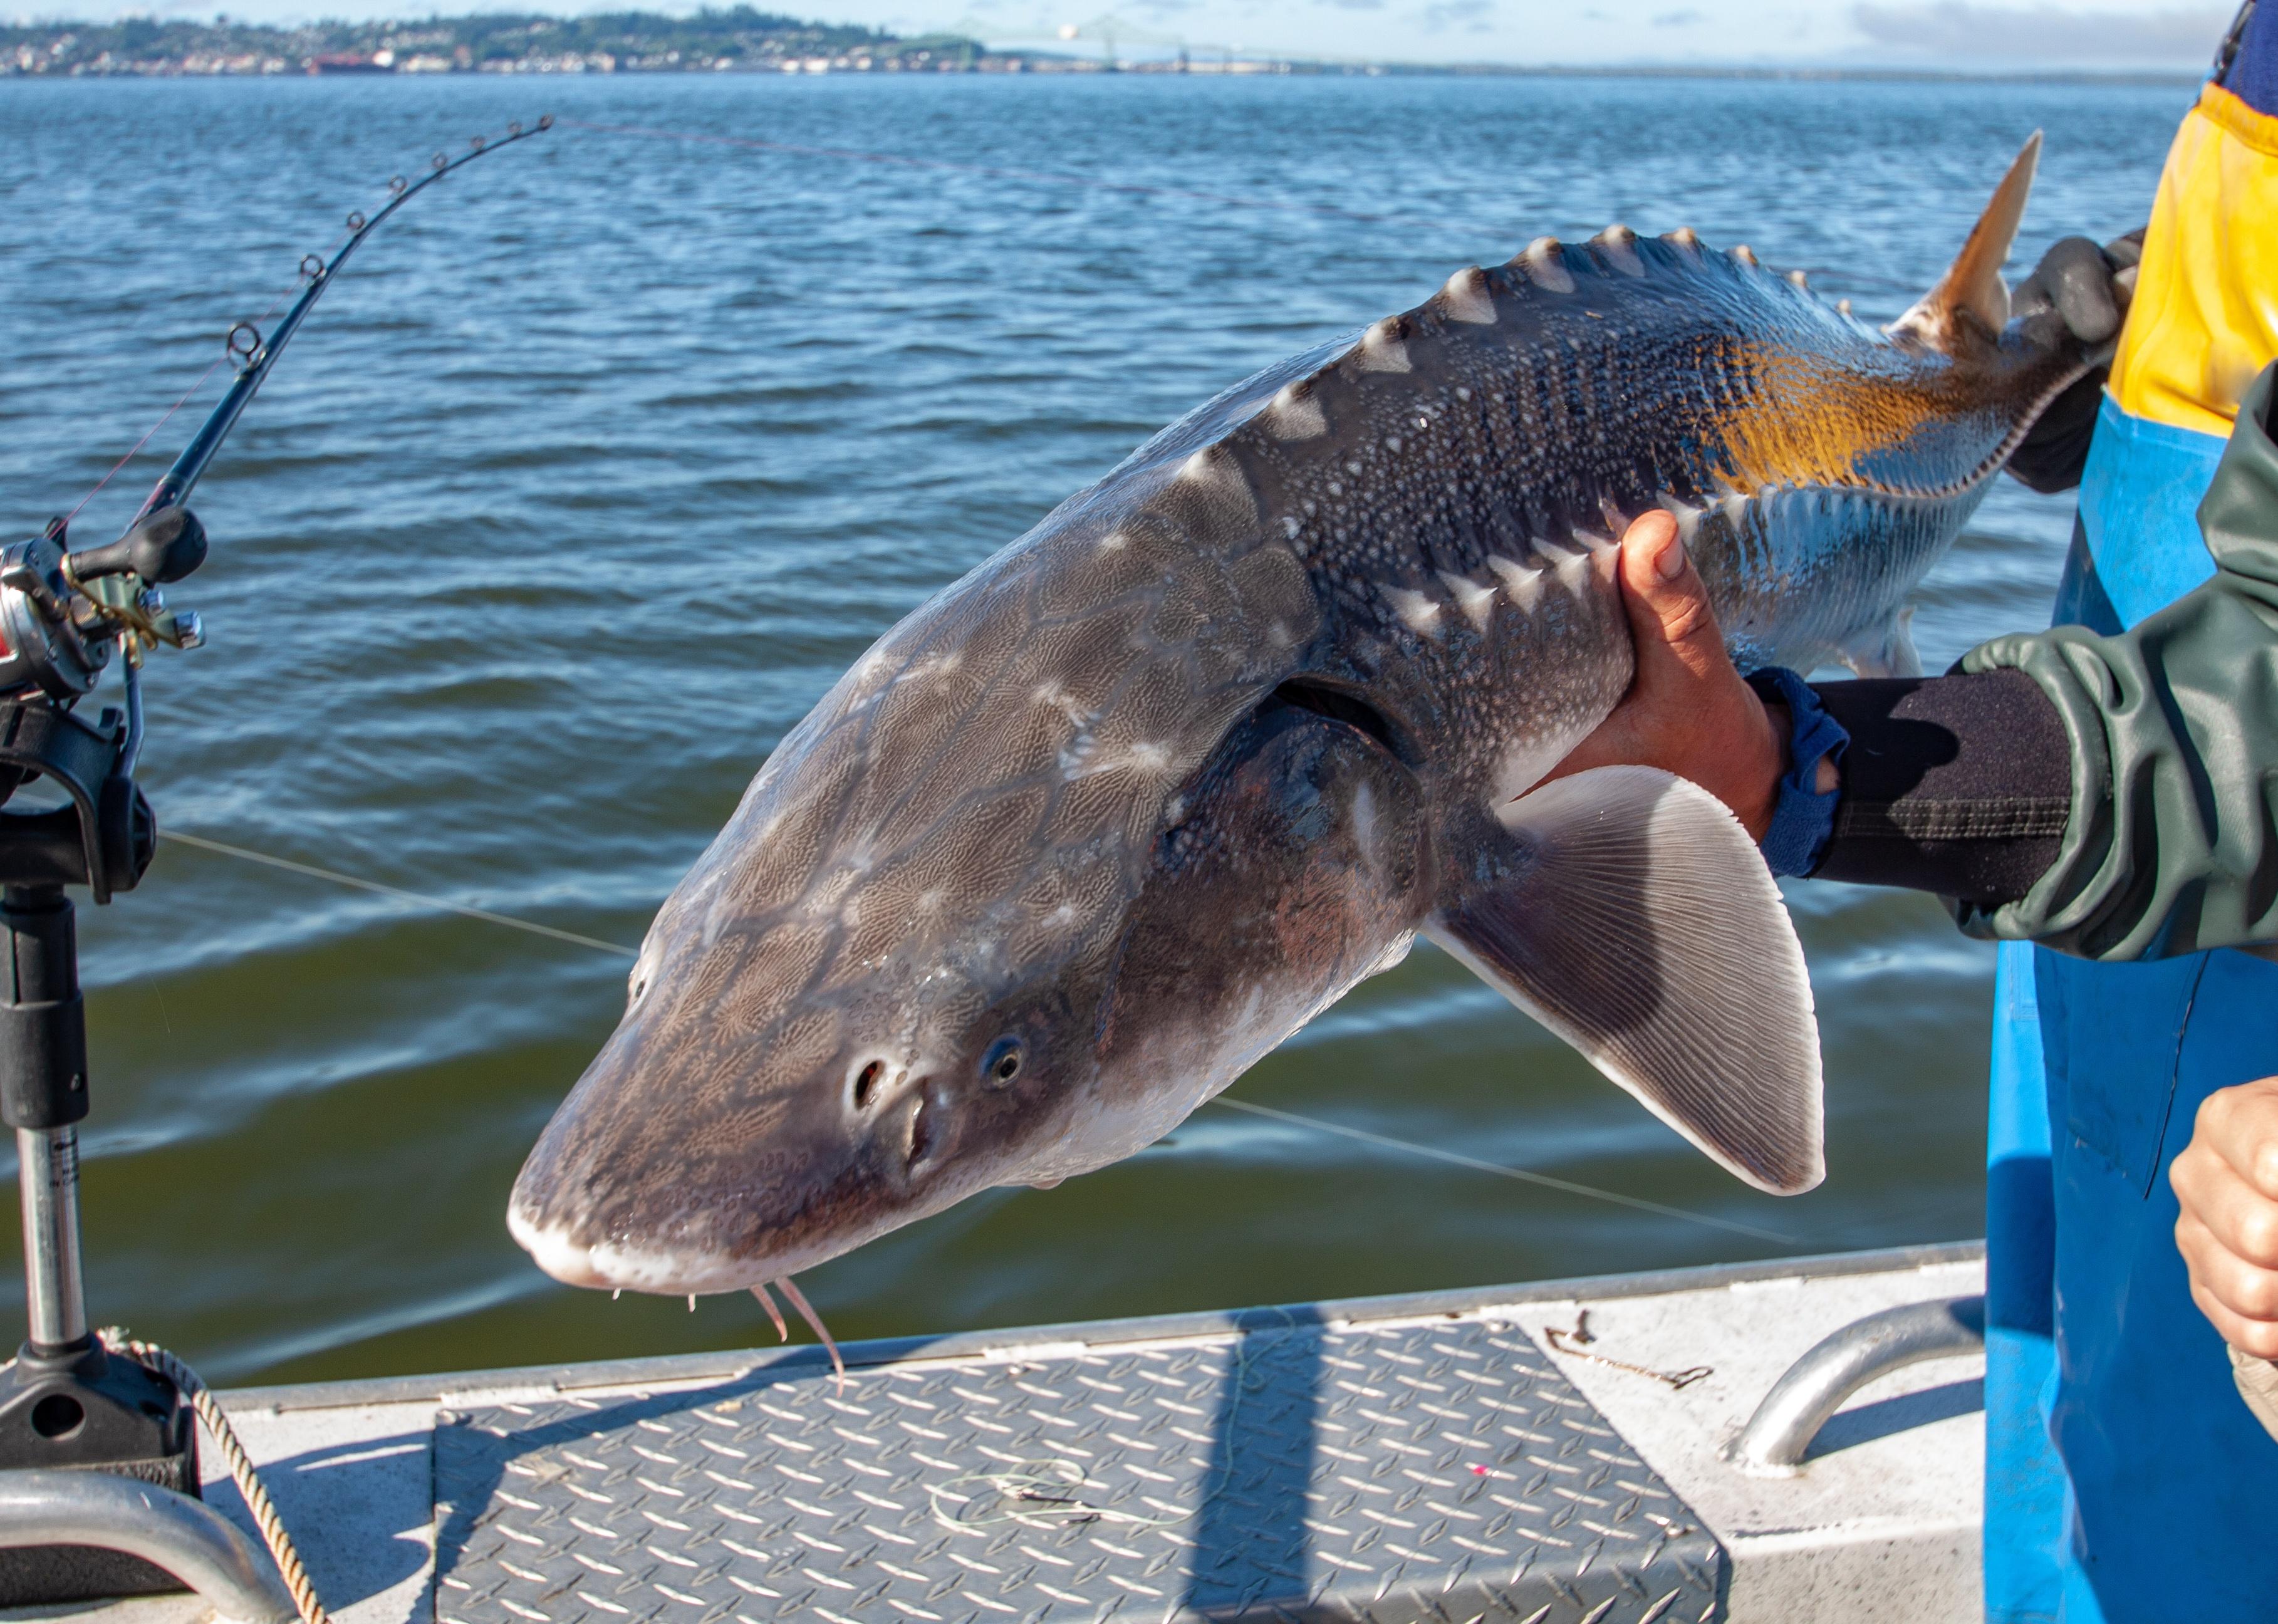 White sturgeon fishing catch and release.